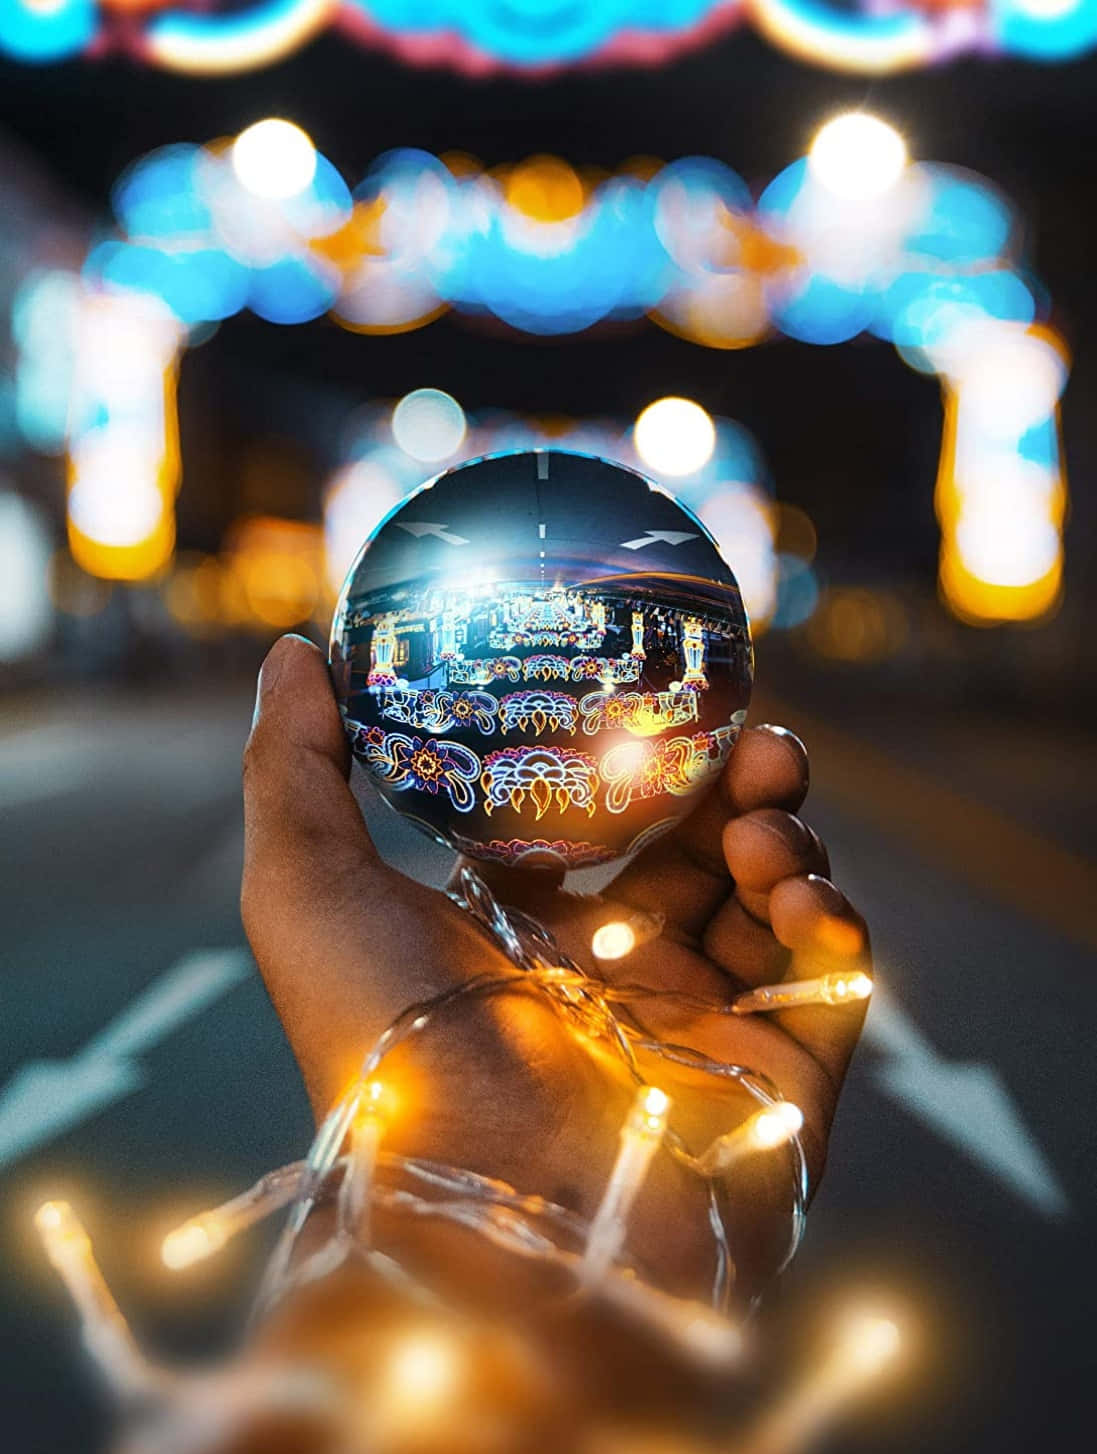 A Hand Holding A Christmas Ball With Lights In It